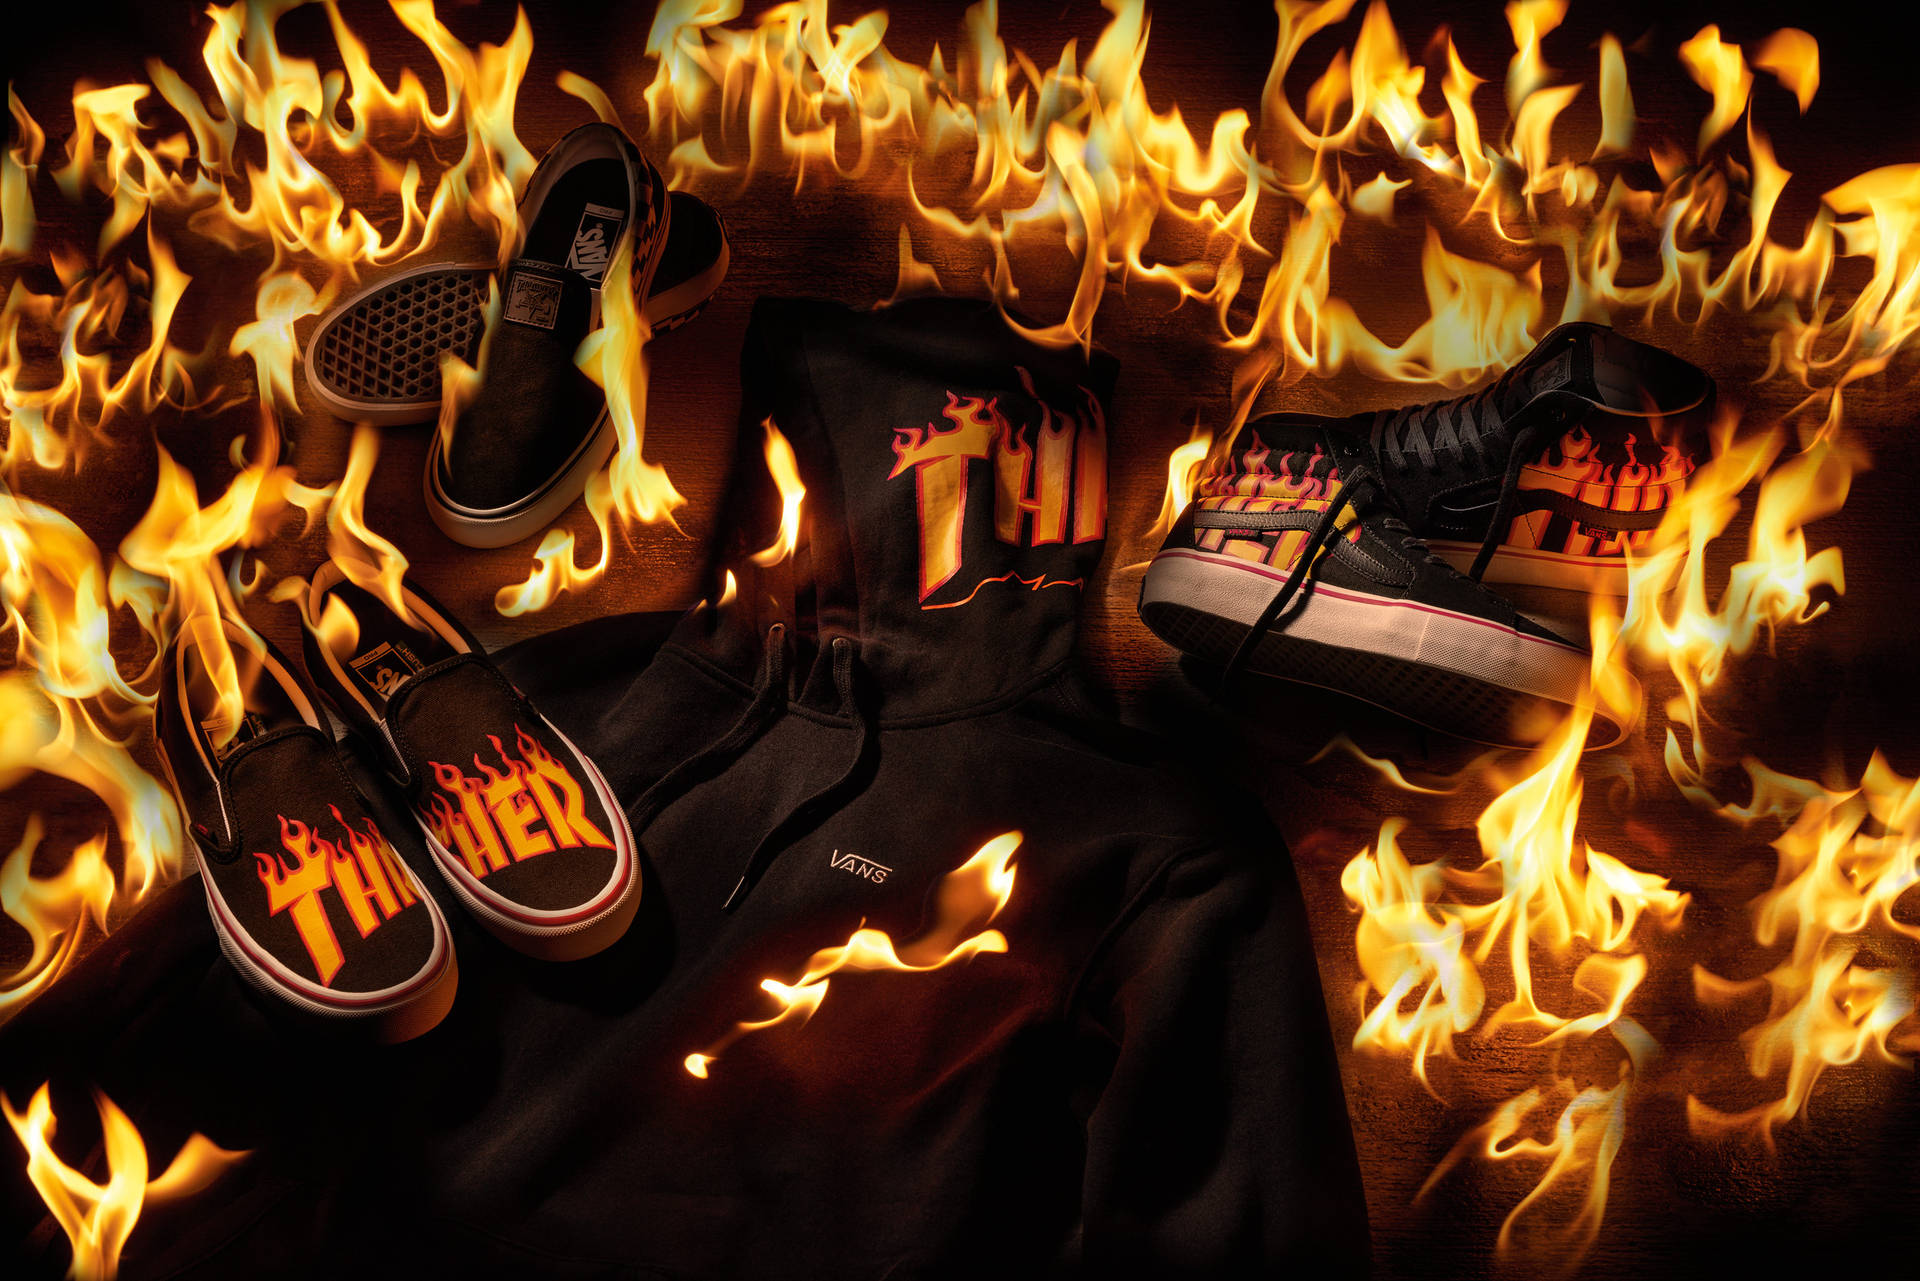 Thrasher's On Vans Collection